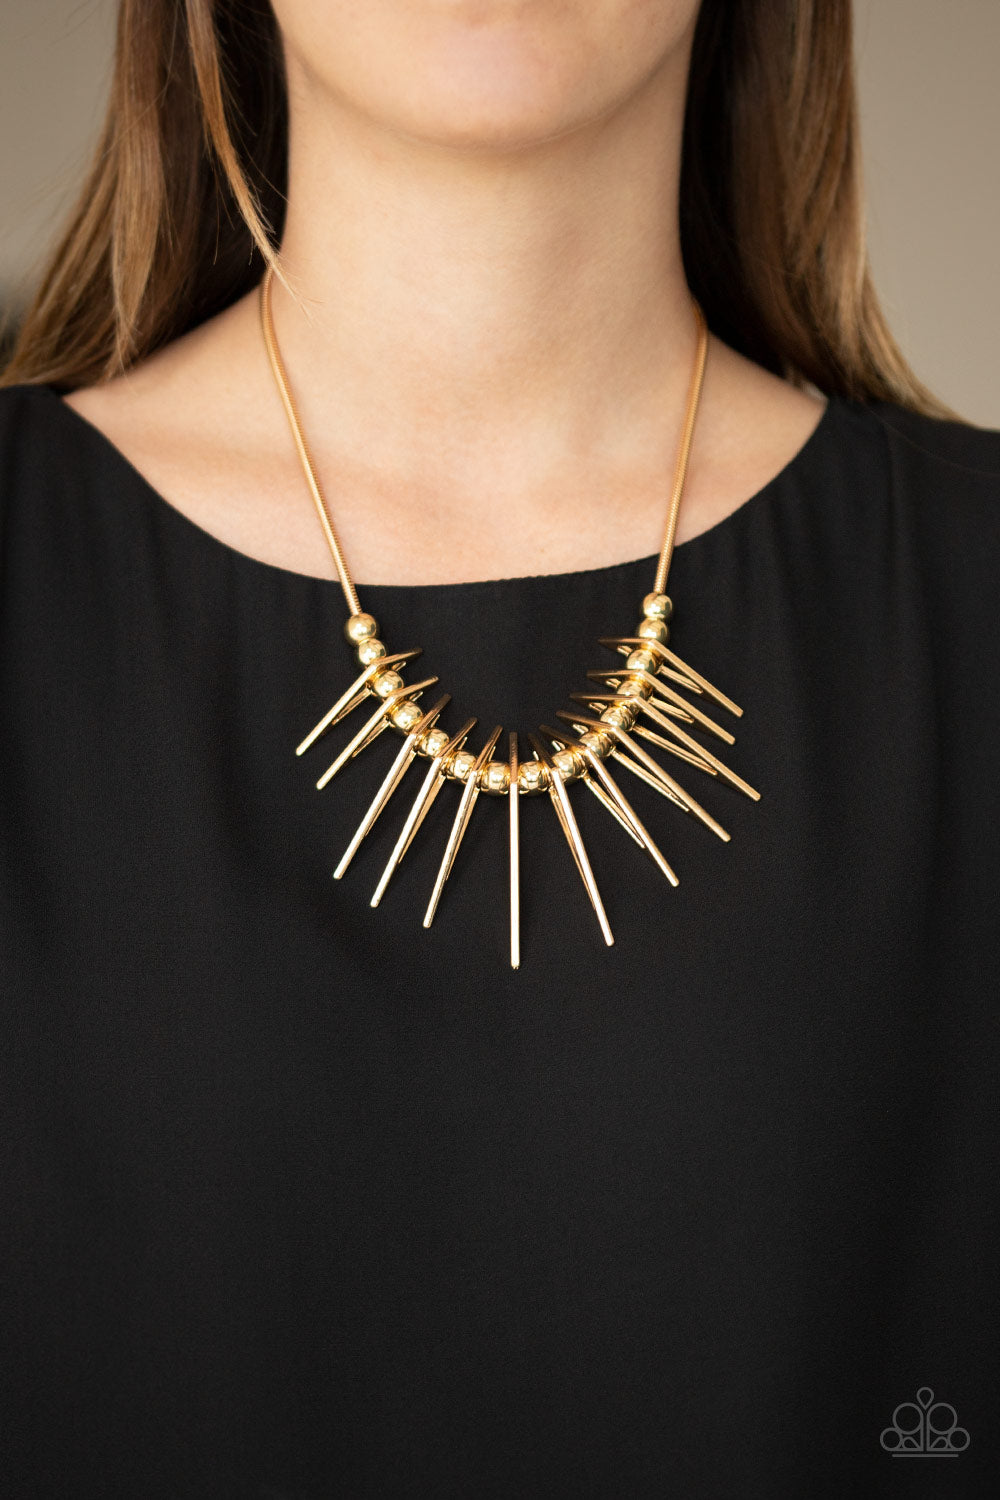 Fully as Gold-Necklace